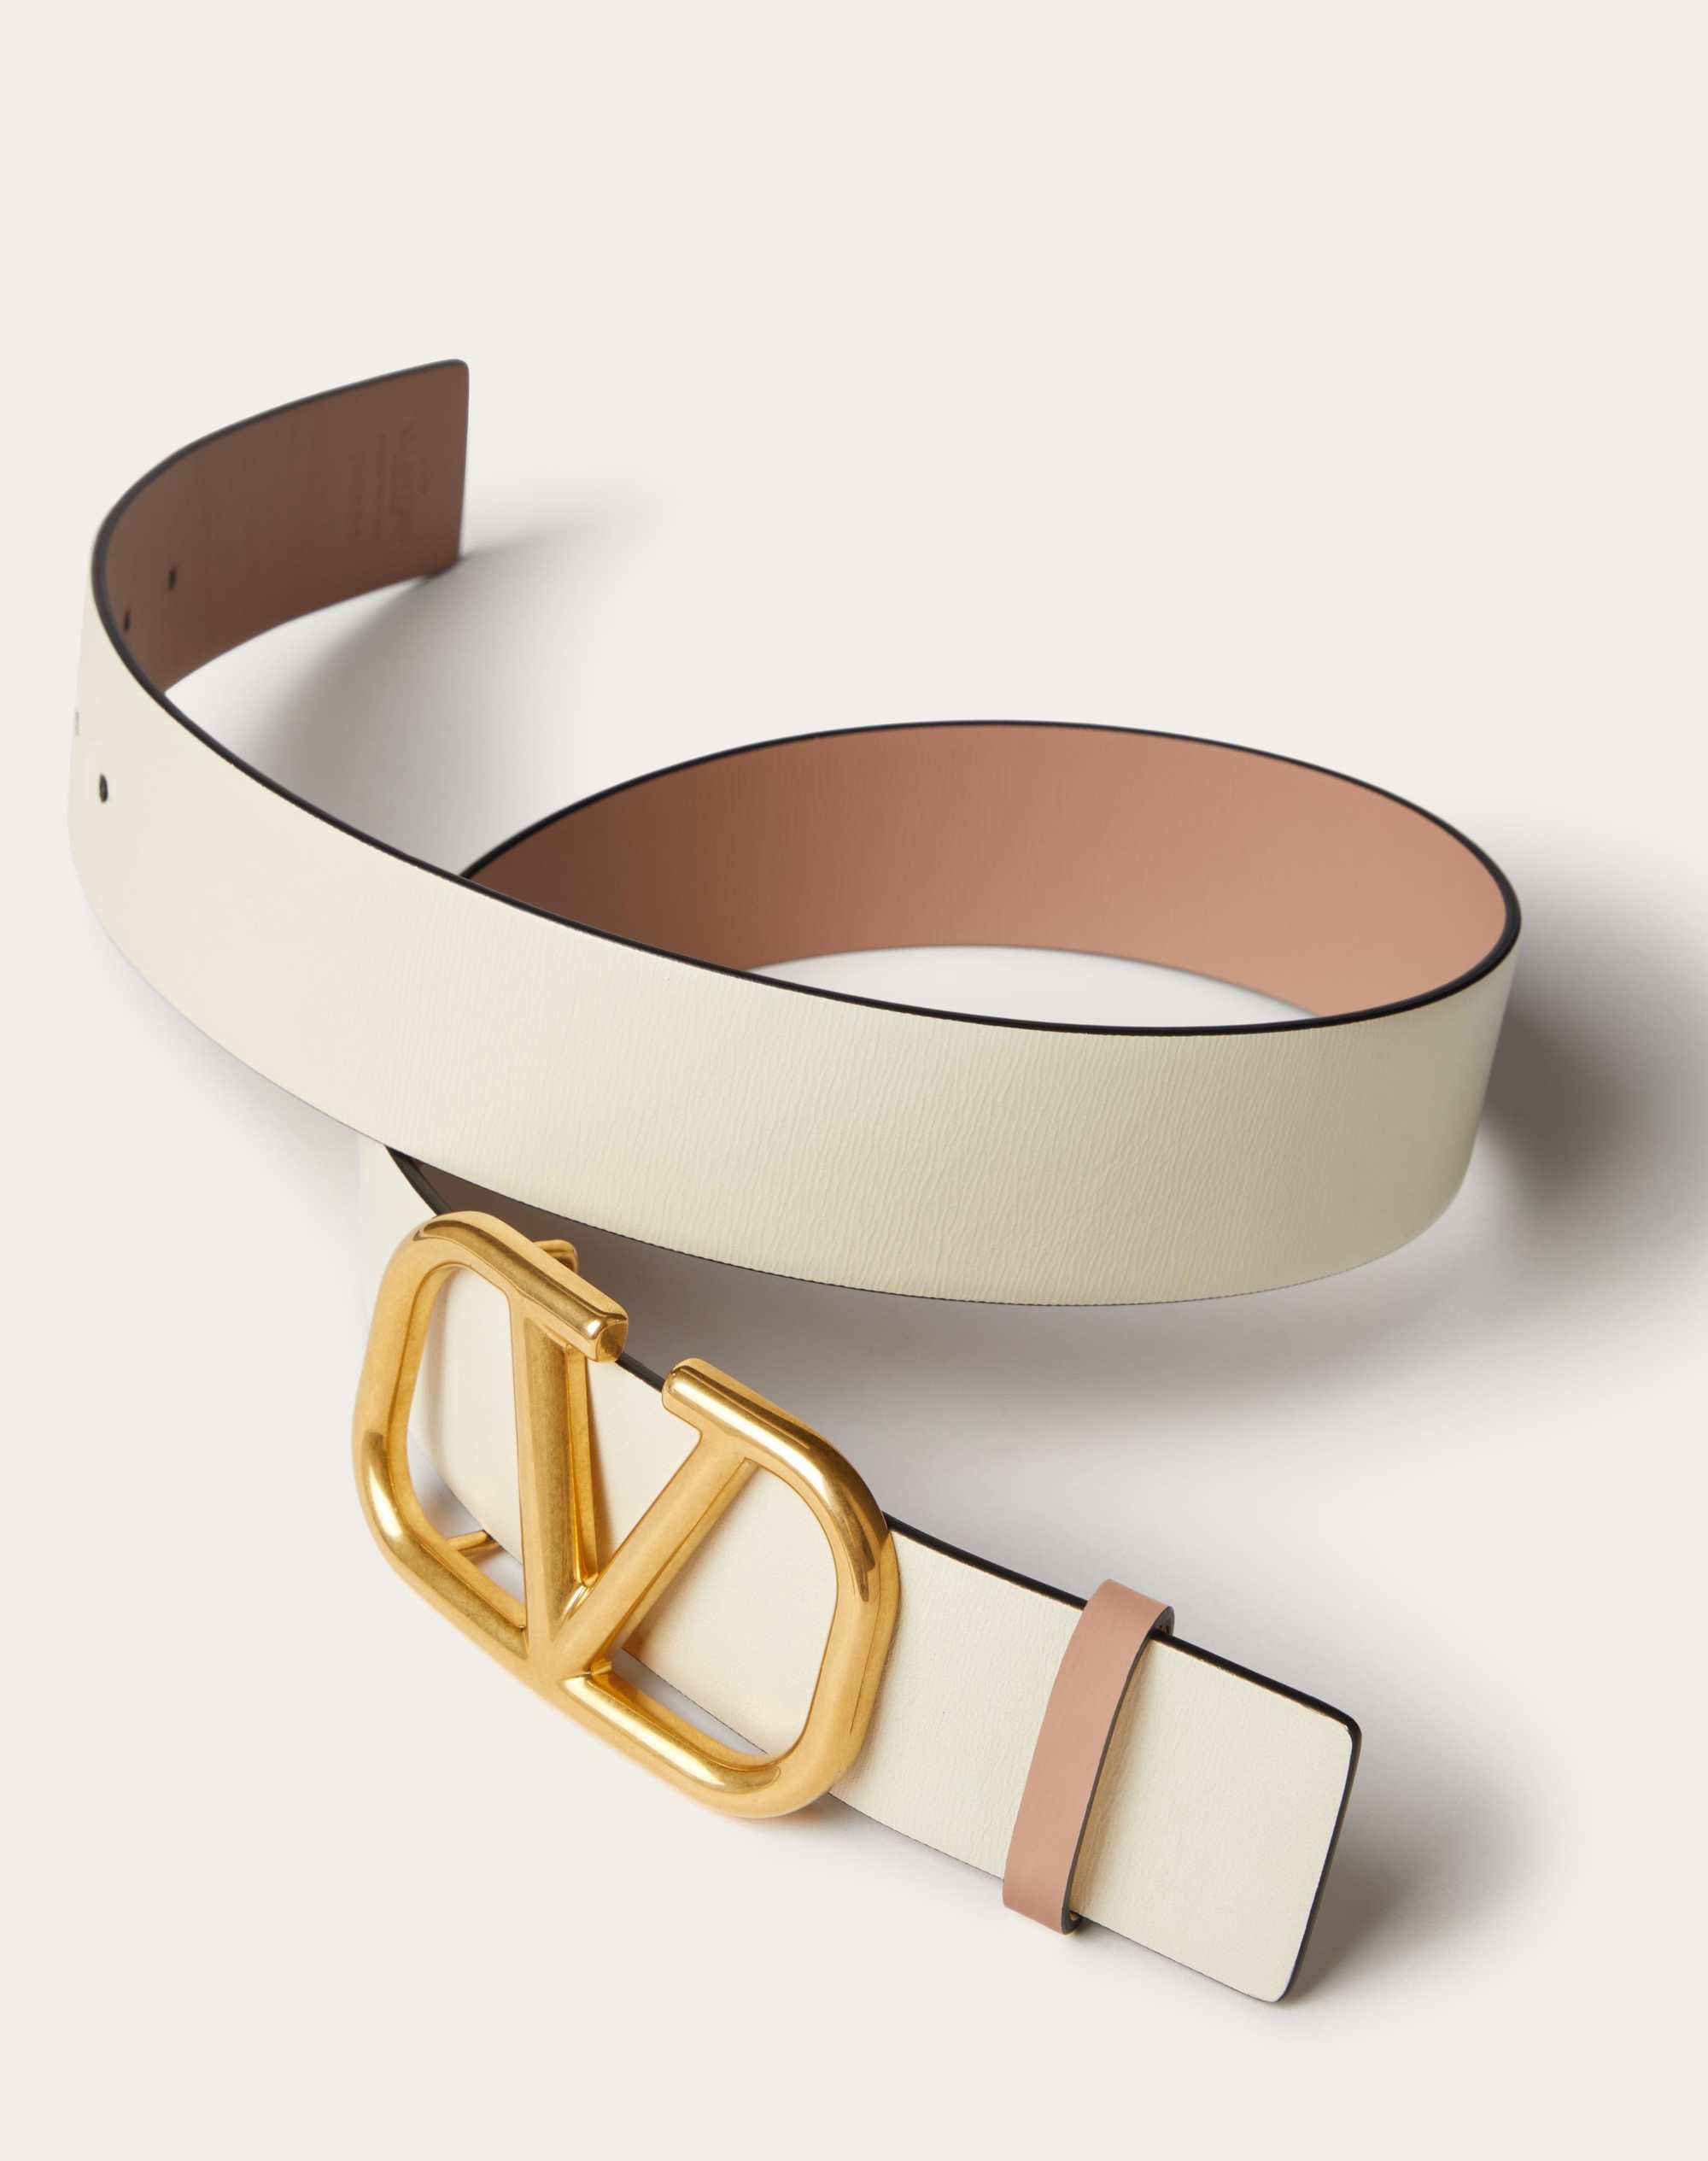 Vlogo Signature Belt In Shiny Calfskin 30mm for Woman in Powder